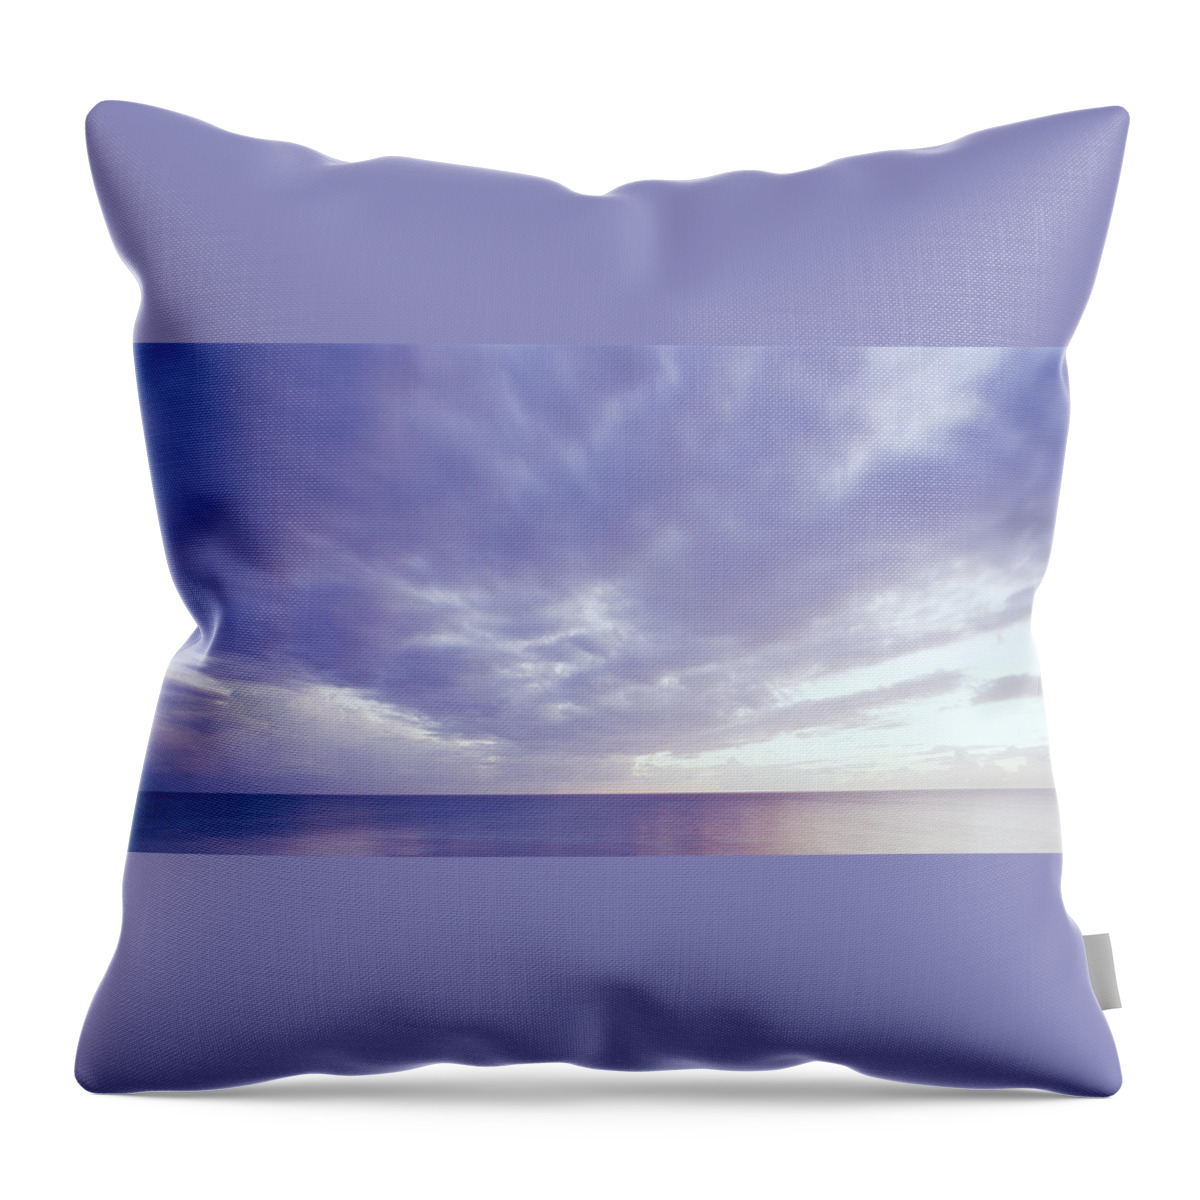 Inspiration Throw Pillow featuring the photograph Ethereal Sky #1 by Shaun Higson